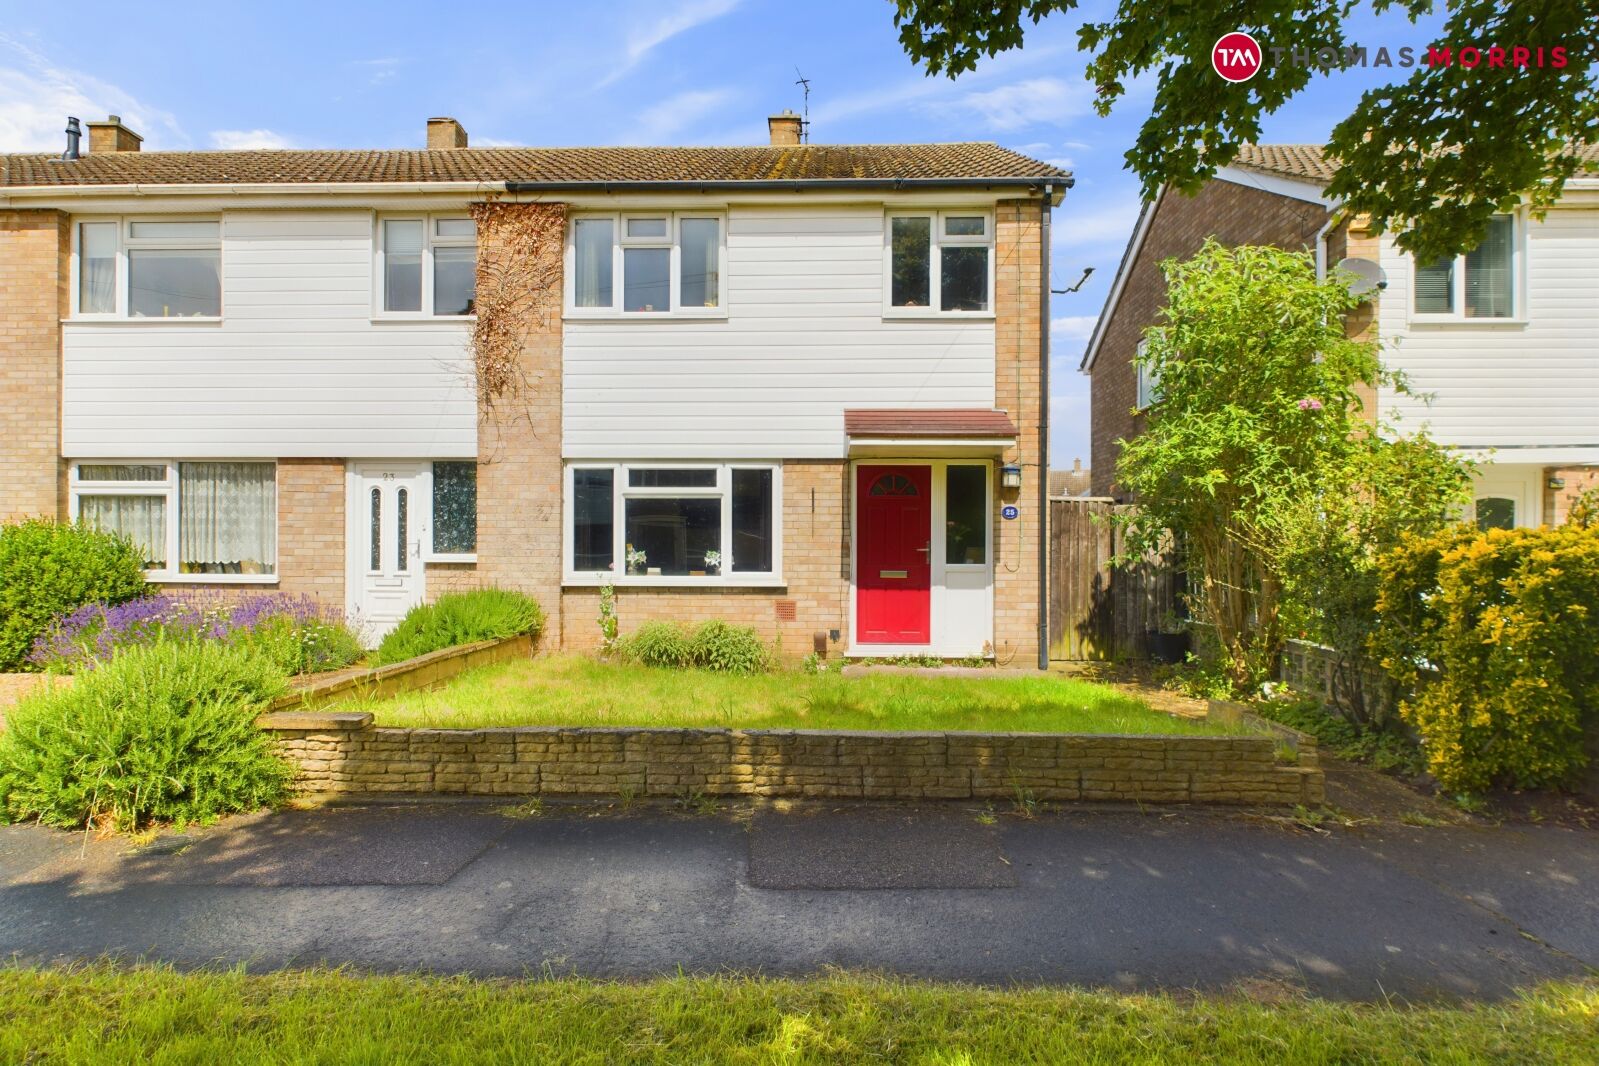 3 bedroom end terraced house for sale Beeson Close, Little Paxton, PE19, main image